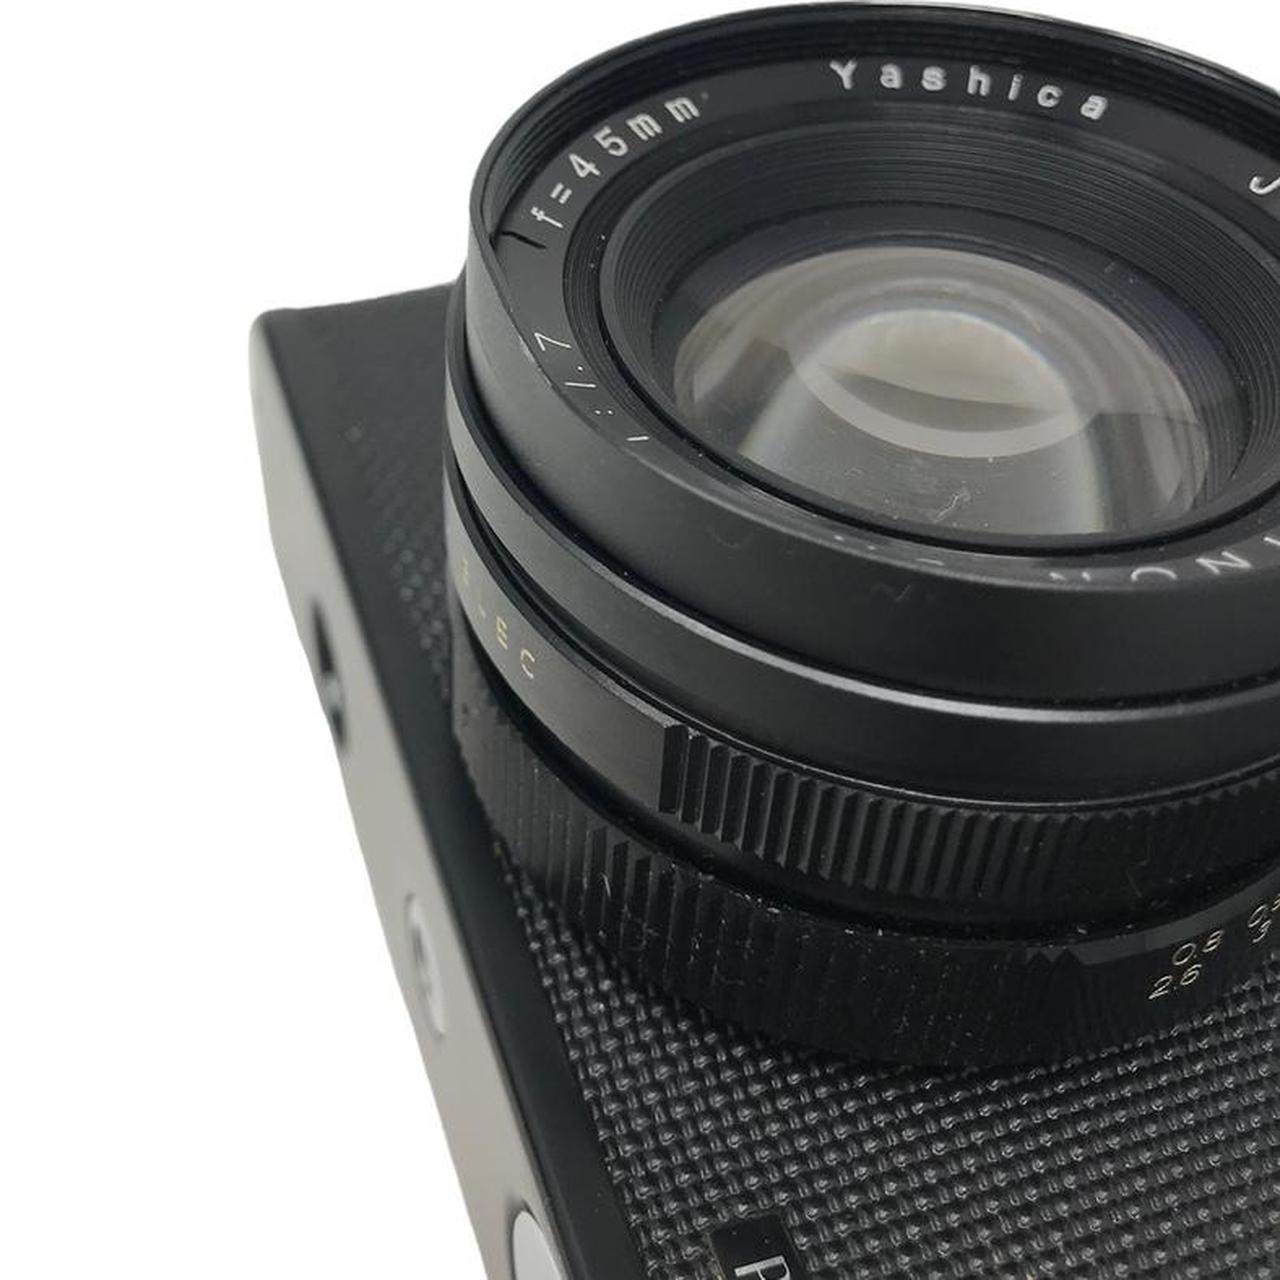 Yashica Black Cameras-and-accessories (3)